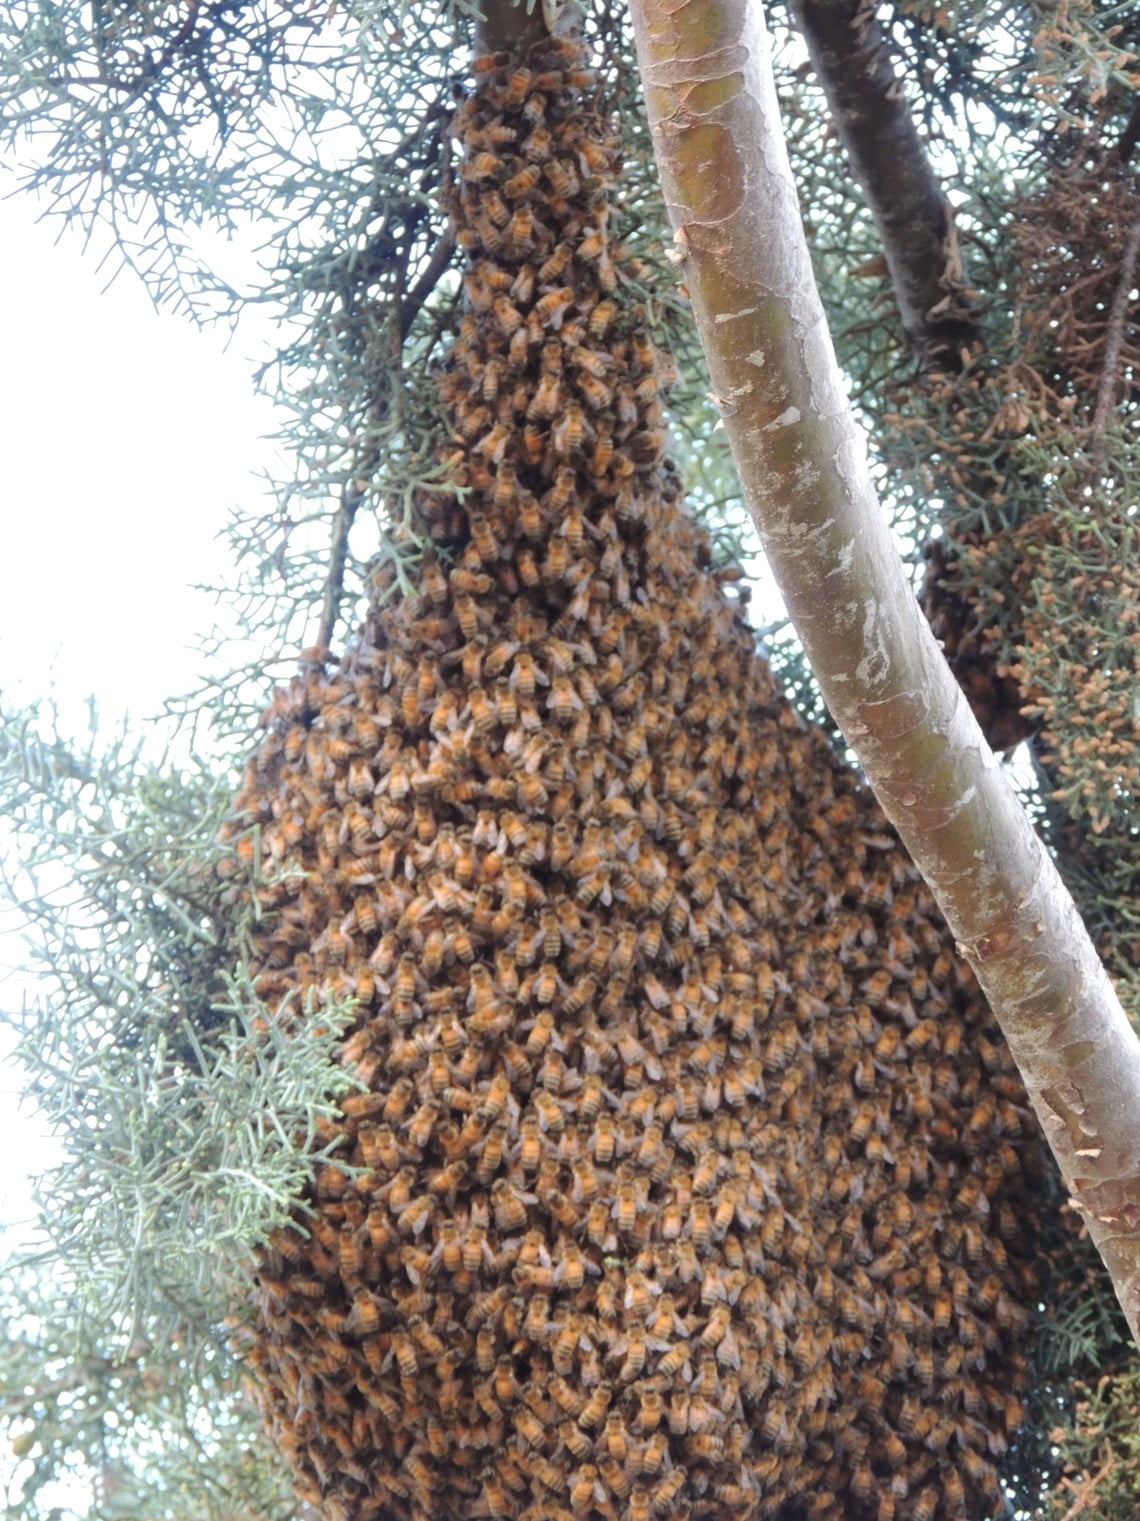 Bee Swarm on Branch